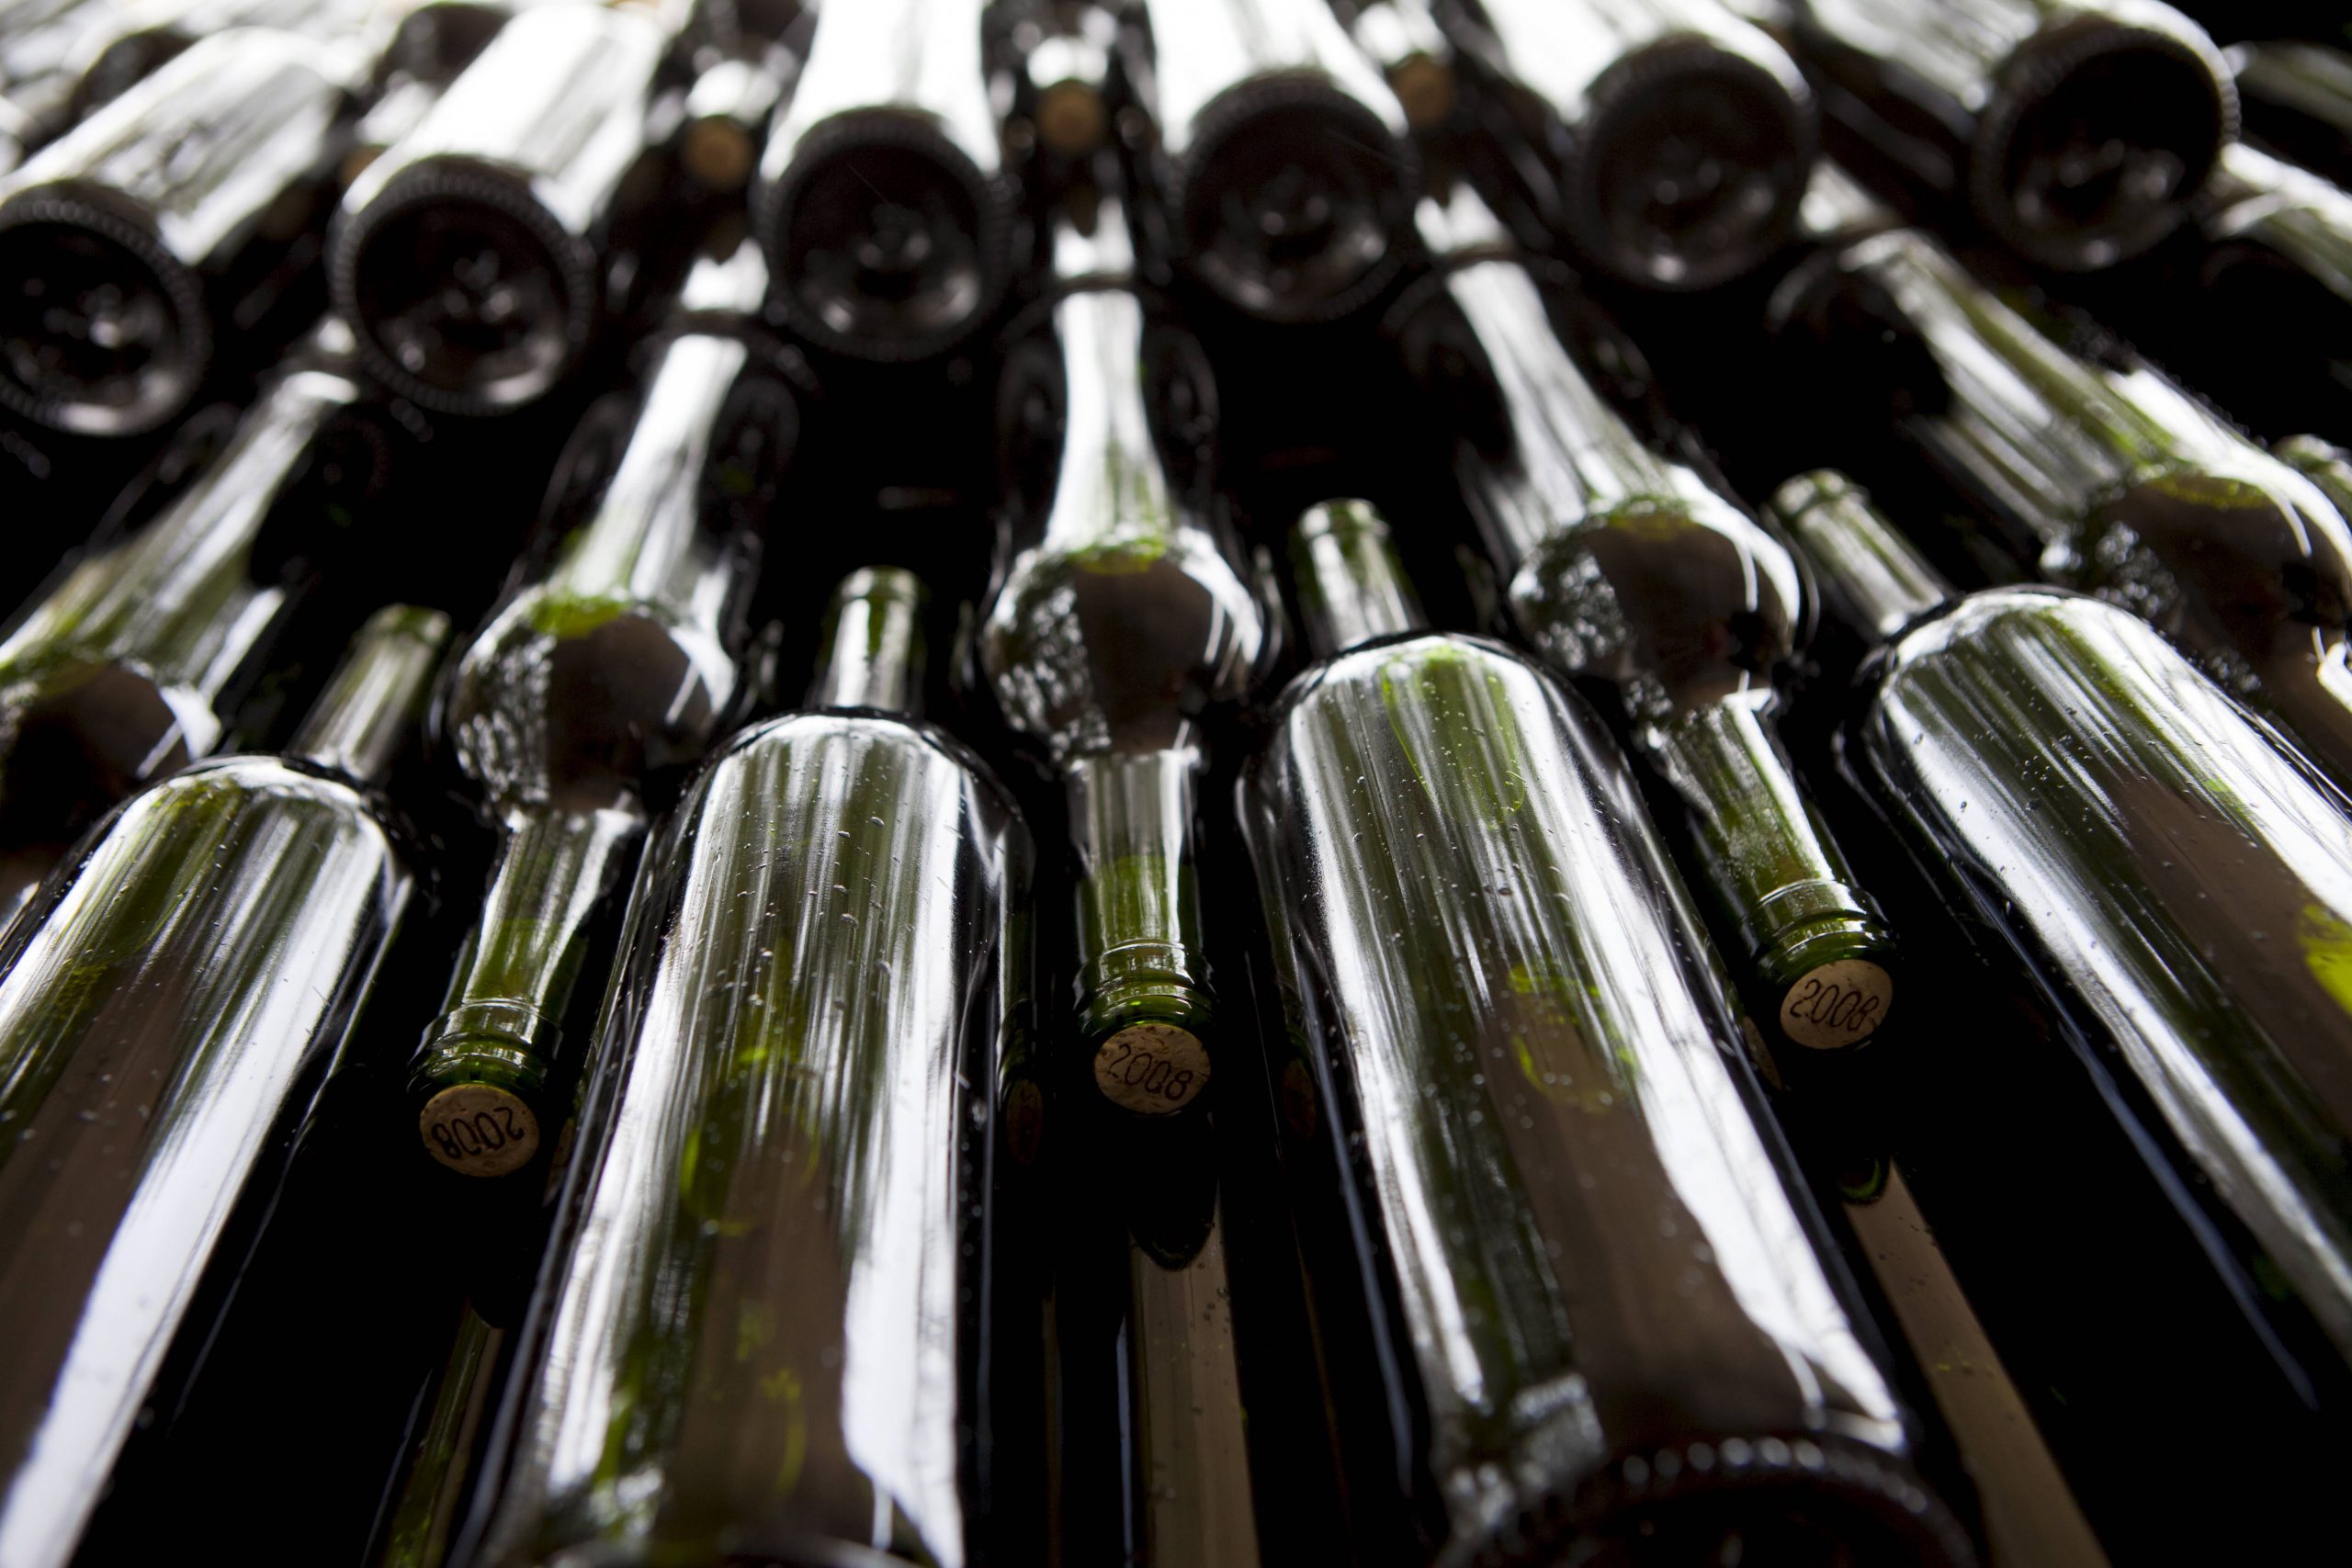 Scandal of cheap Spanish wine exported to France with bogus 'French' labels slapped on bottles